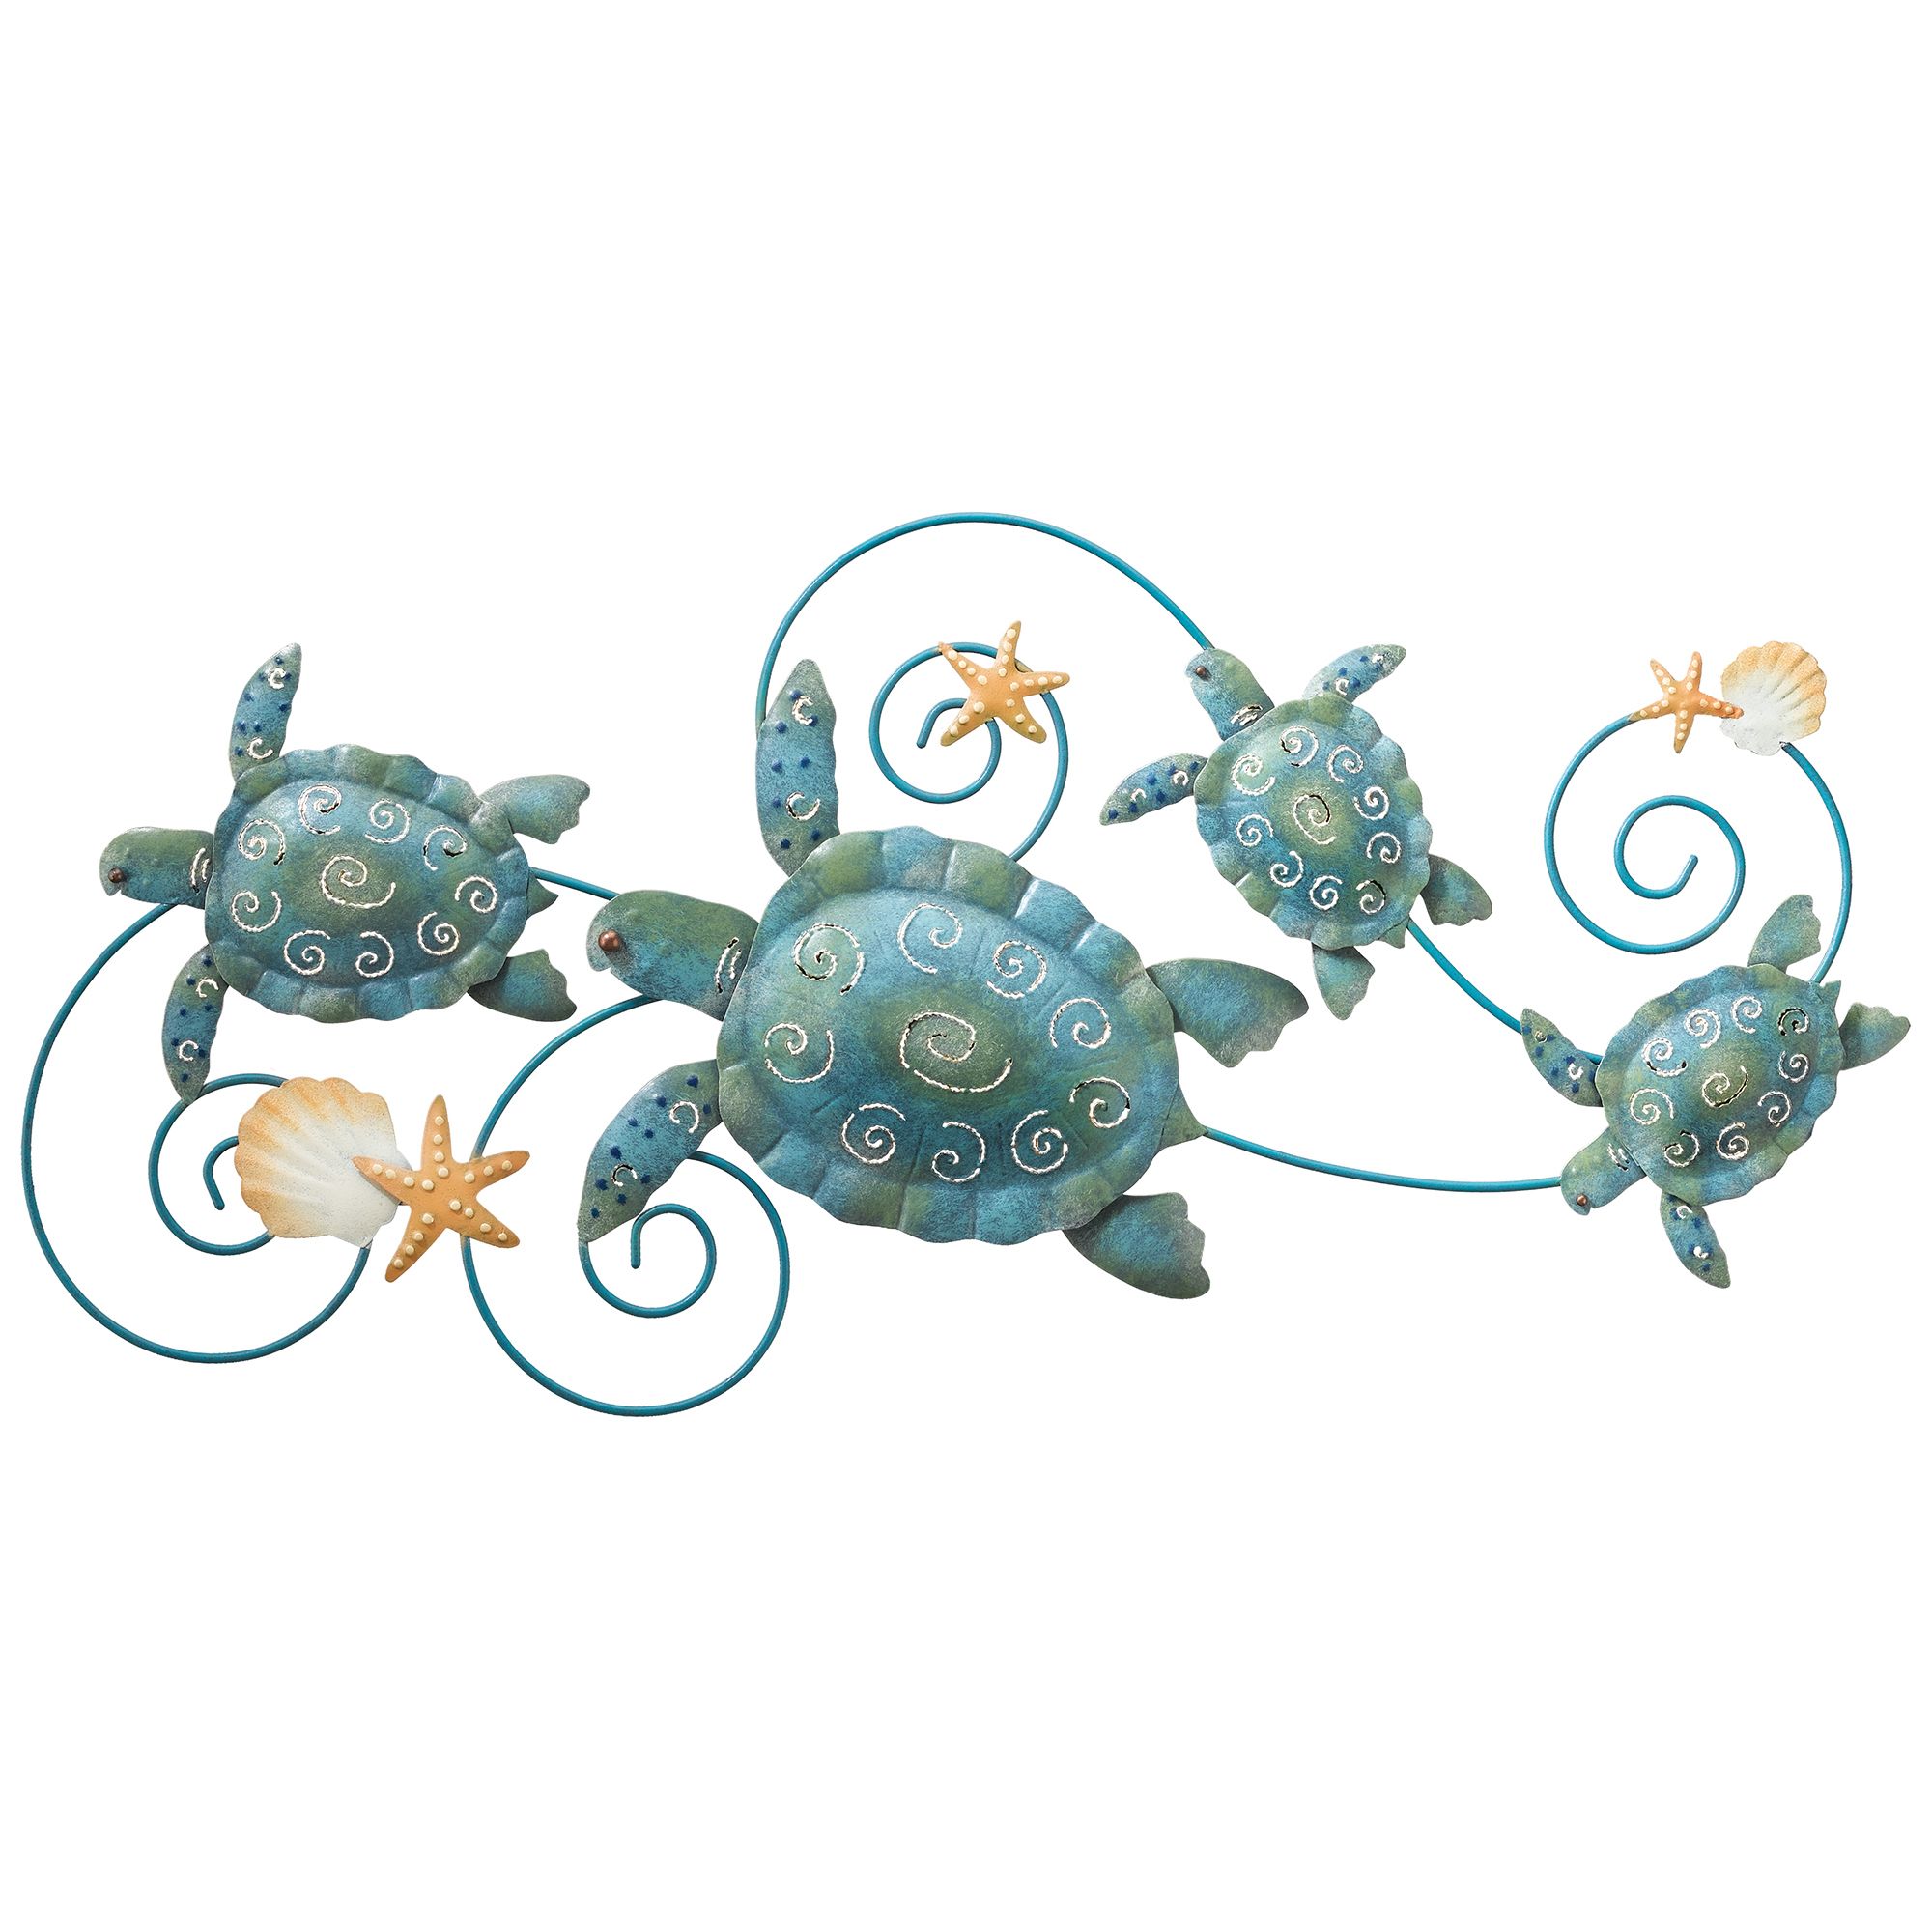 Regal Metal Sea Turtle Wall Decor | Ross Simons With Turtles Wall Art (View 11 of 15)